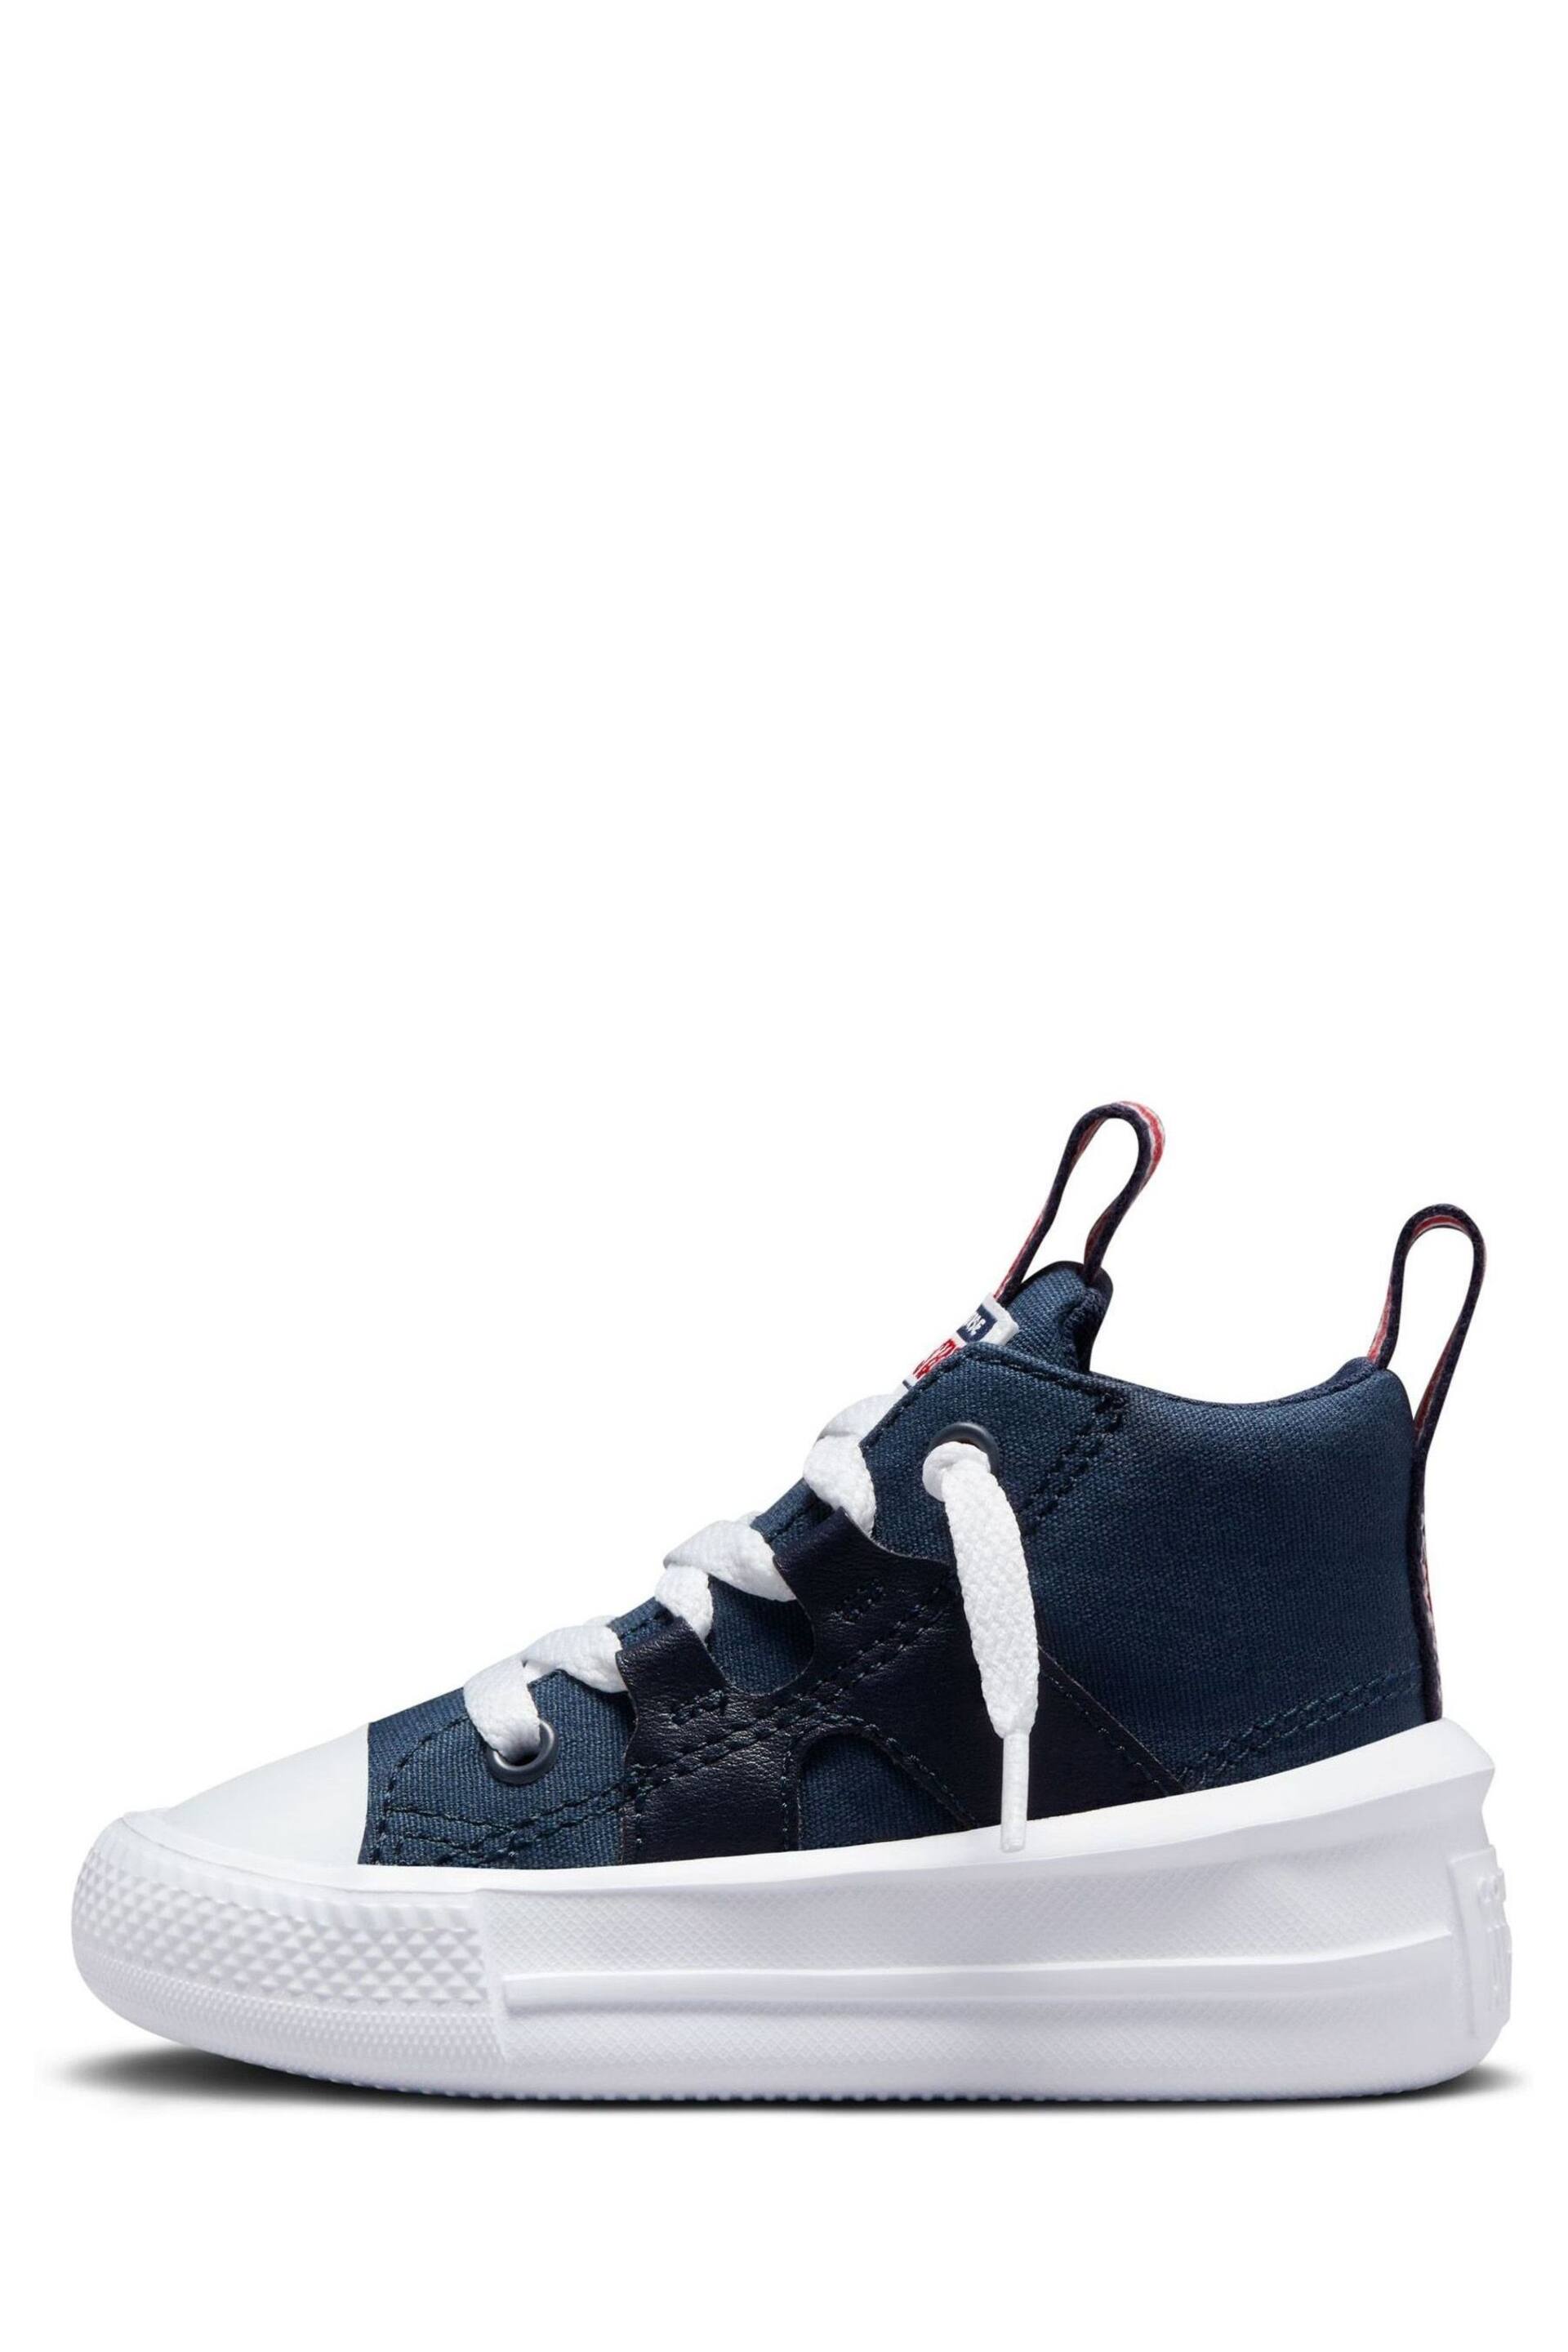 Converse Navy Ultra Infant Trainers - Image 2 of 7